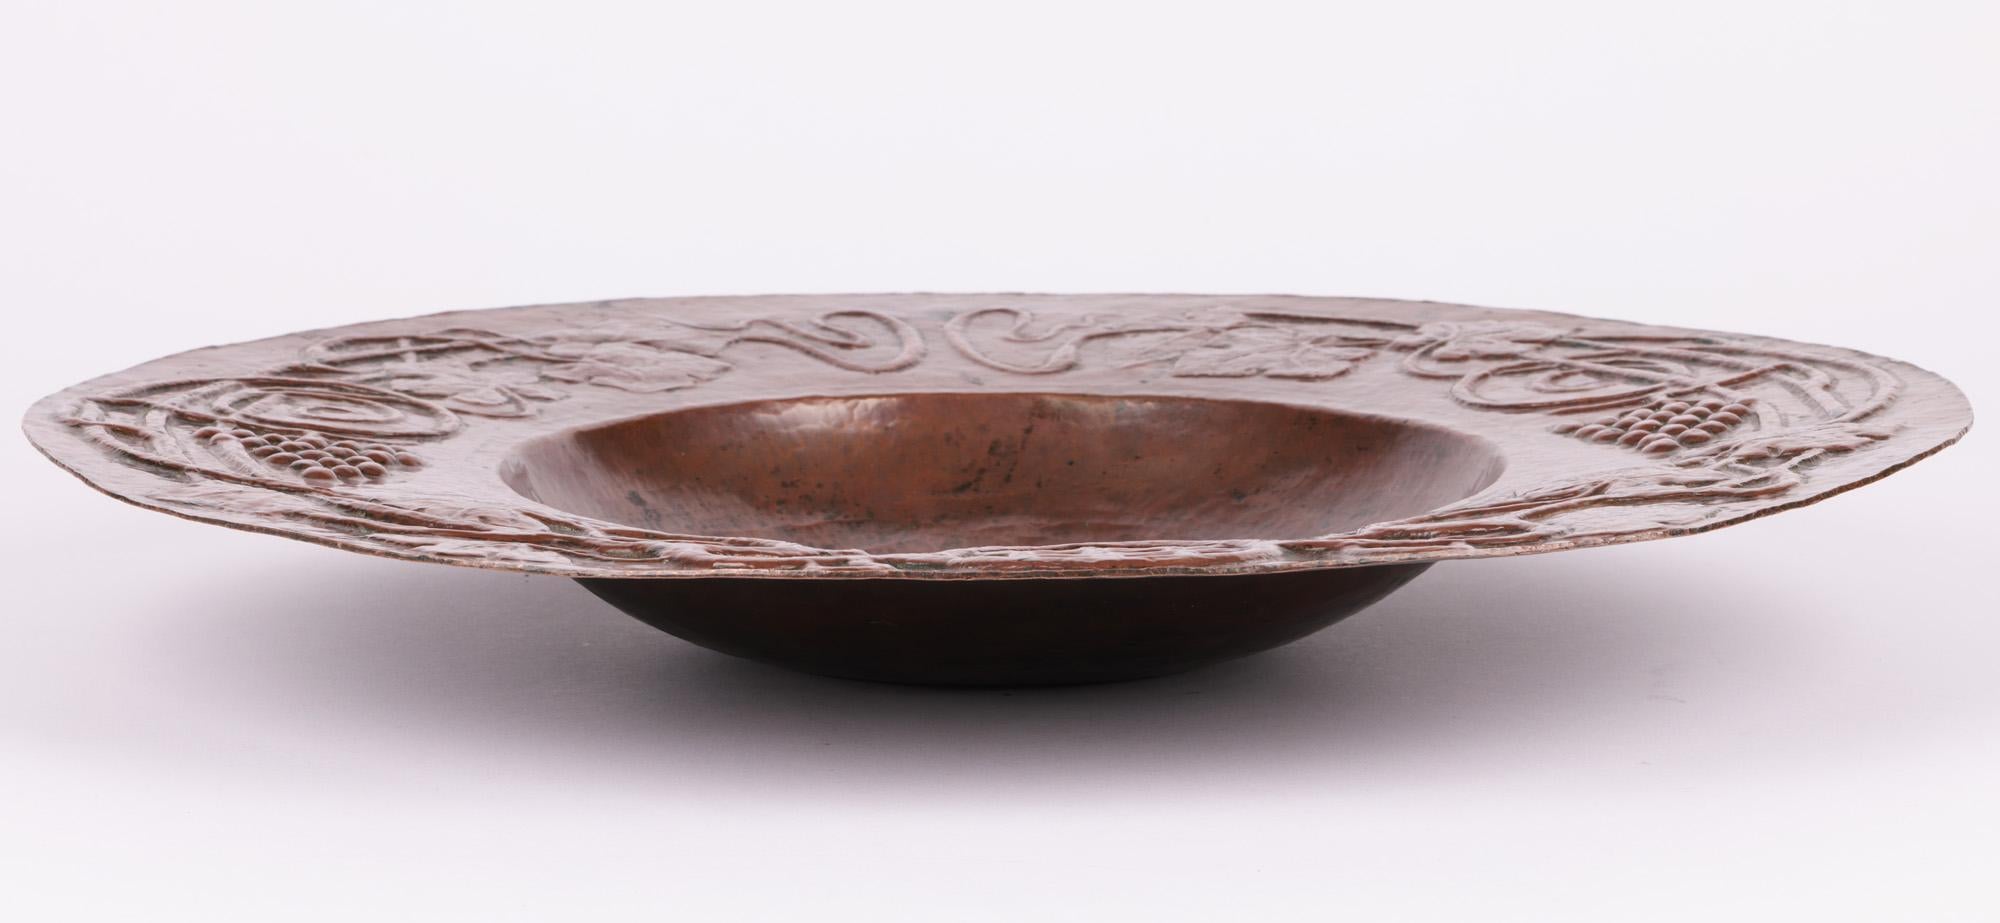 An exceptional and unique hand-crafted Arts & Crafts heavy large copper fruit bowl with molded fruiting vines by renowned artist George Hugo Tabor (British, 1857-1920) and dating from around 1880. 

George Hugo Tabor joined Doulton Lambeth in 1881